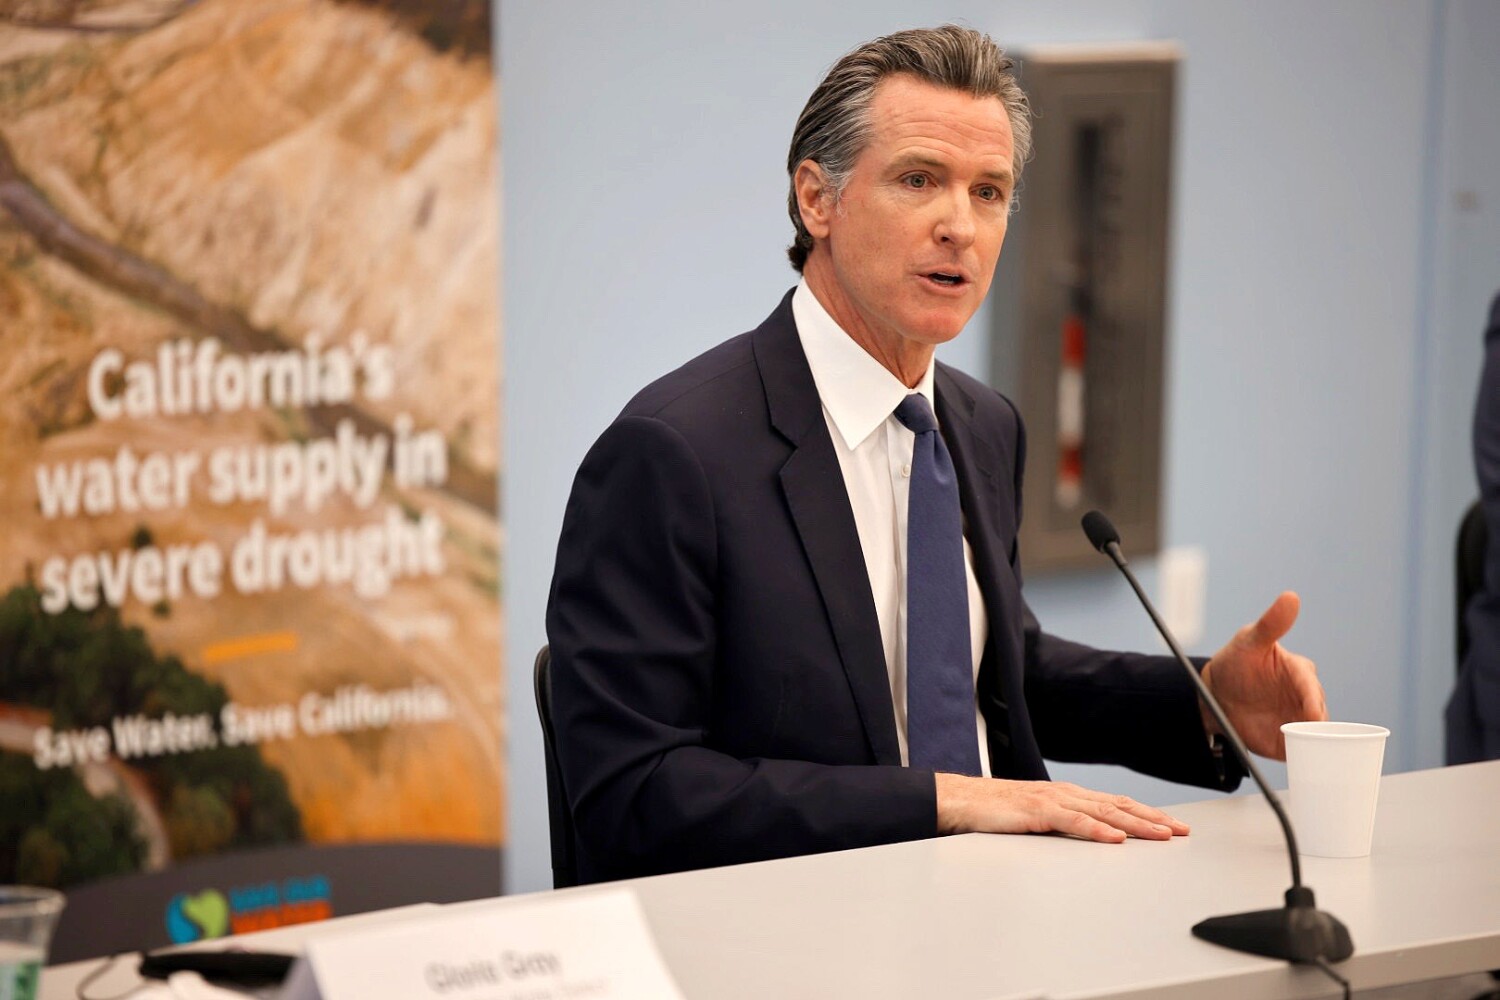 Amid fight with oil industry, Newsom makes a last-minute pitch to harden California's climate goals